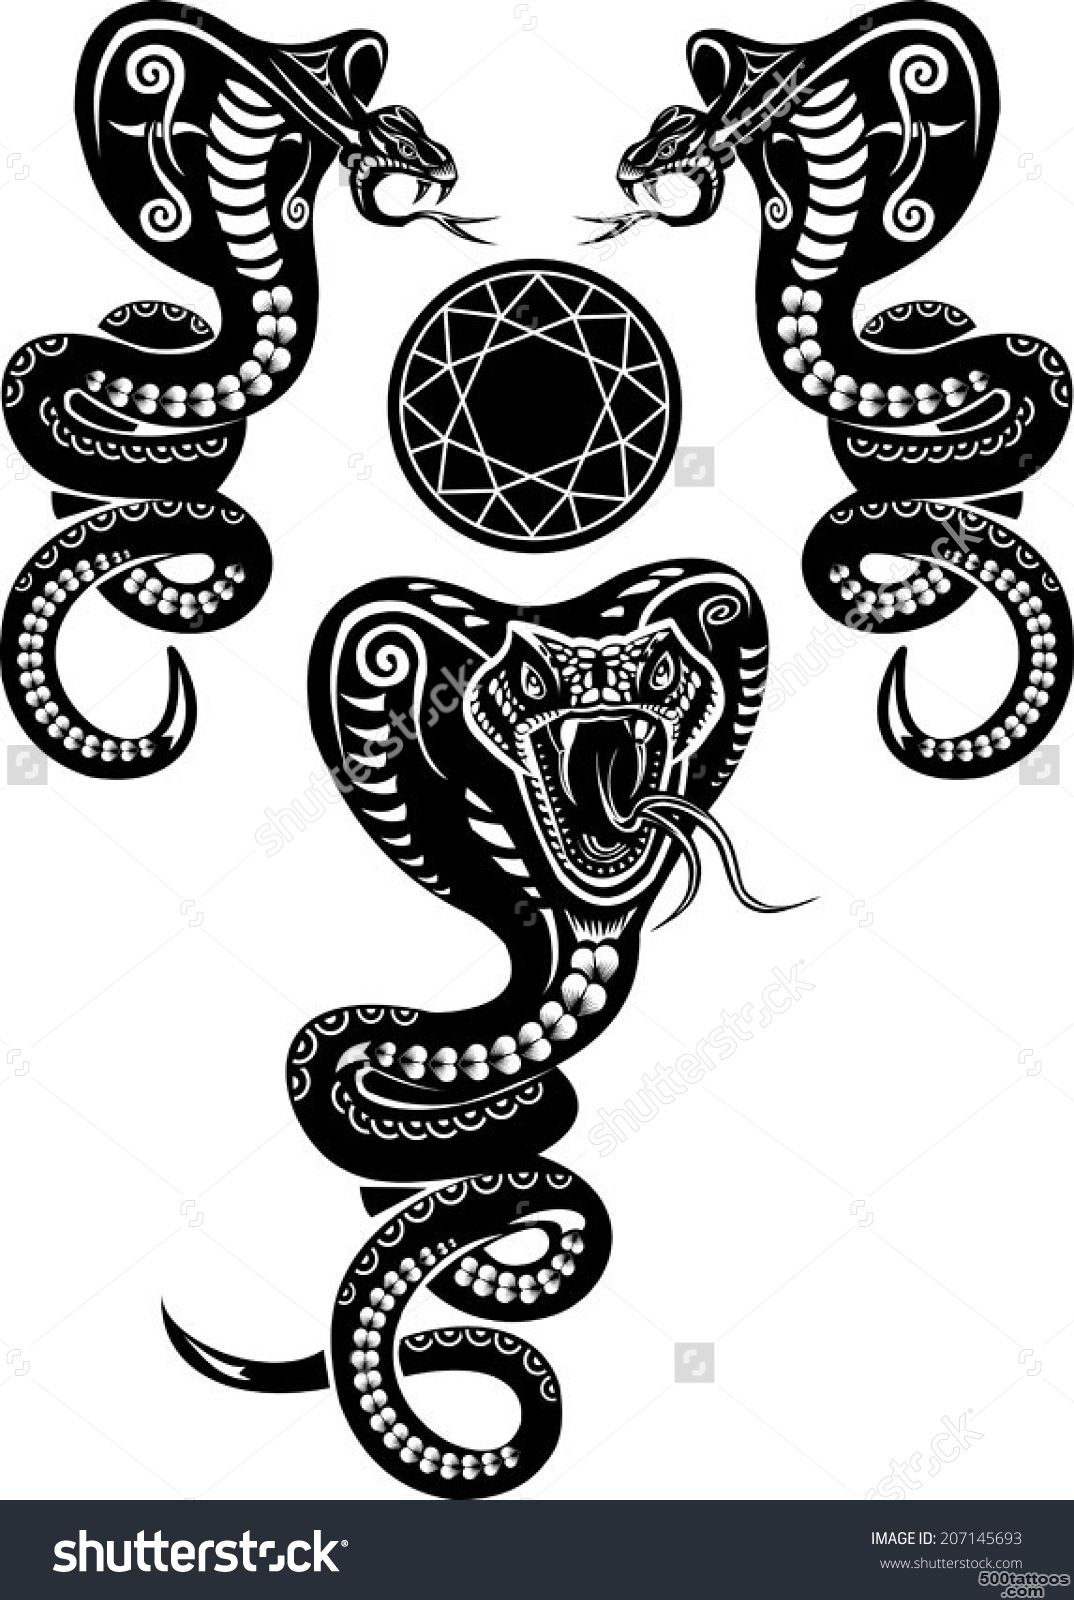 Cobra Tattoo Stock Photos, Images, amp Pictures  Shutterstock_6